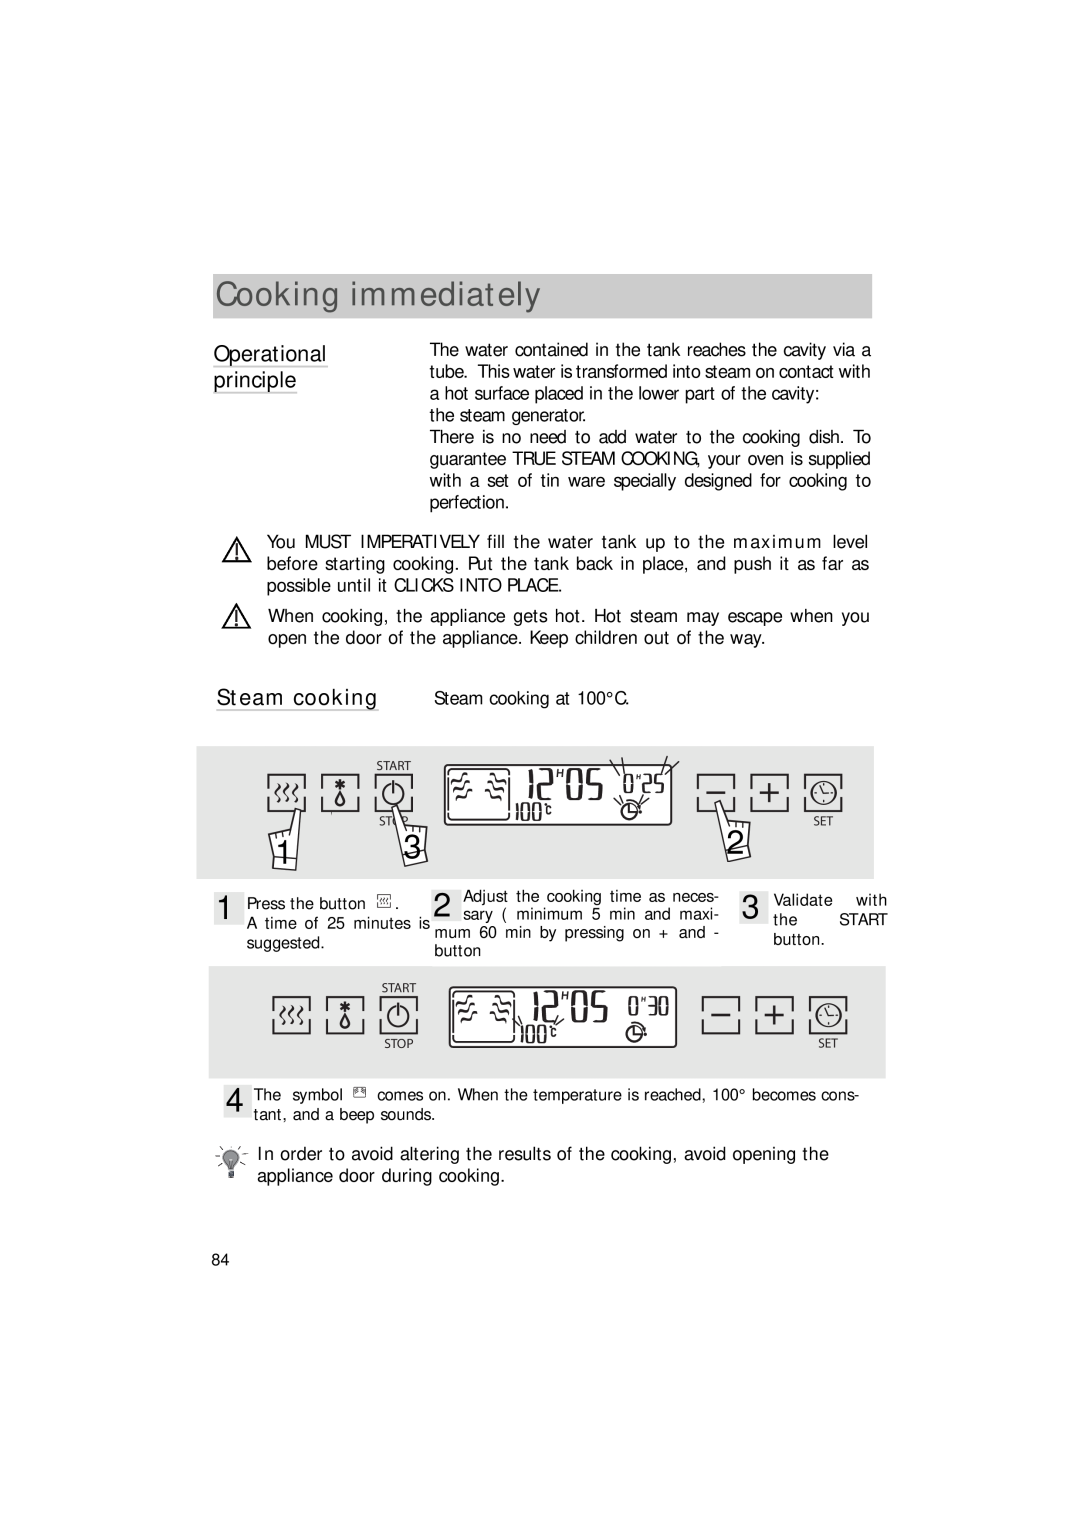 Hotpoint SEO100 manual Cooking immediately, Steam cooking 